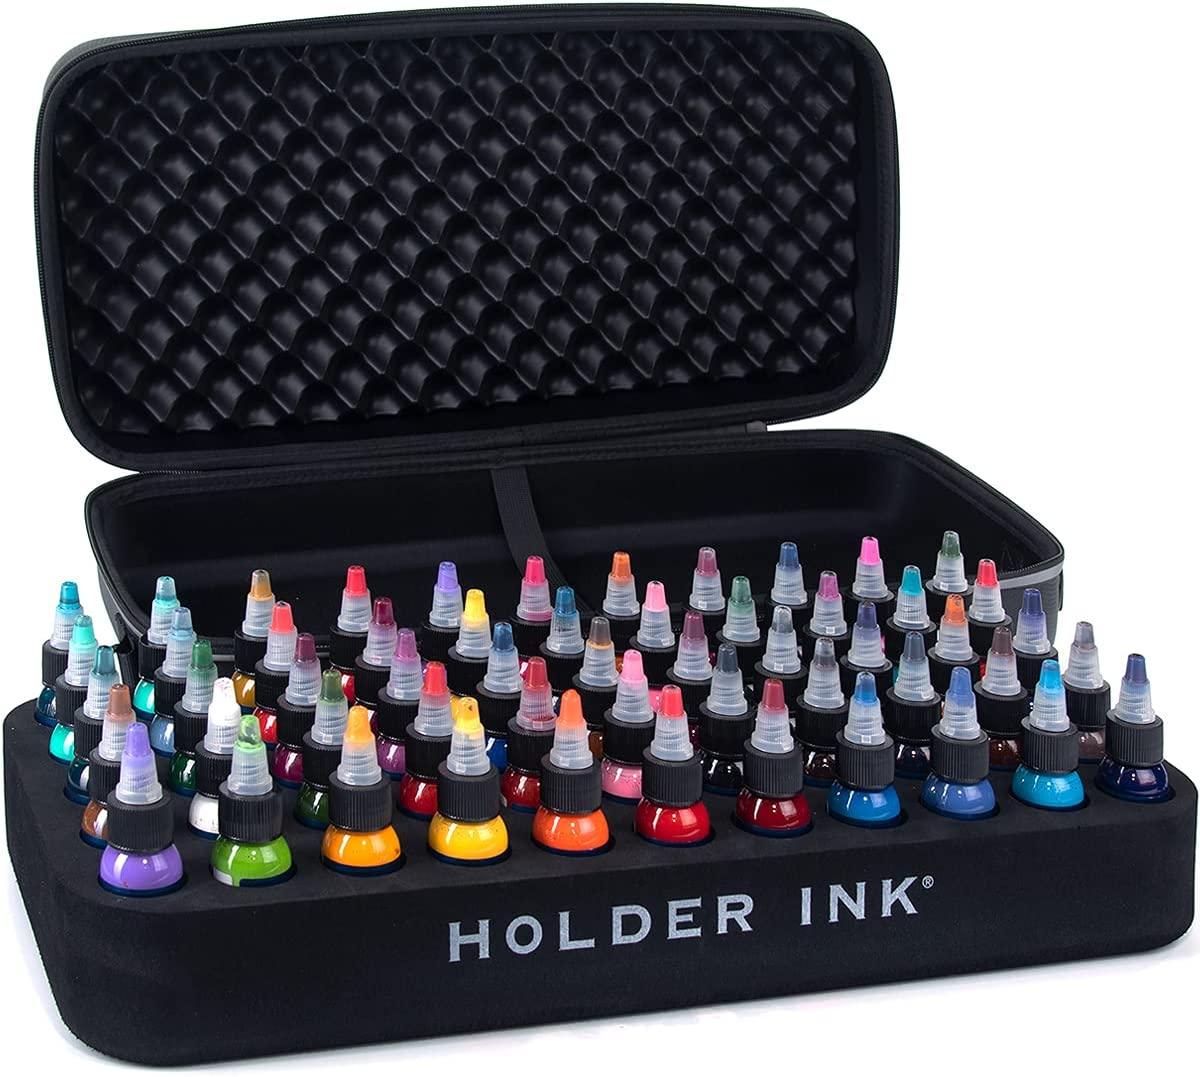 Holder Ink@ - Tattoo Ink Case for 55 colours - Tattoo Everything Supplies